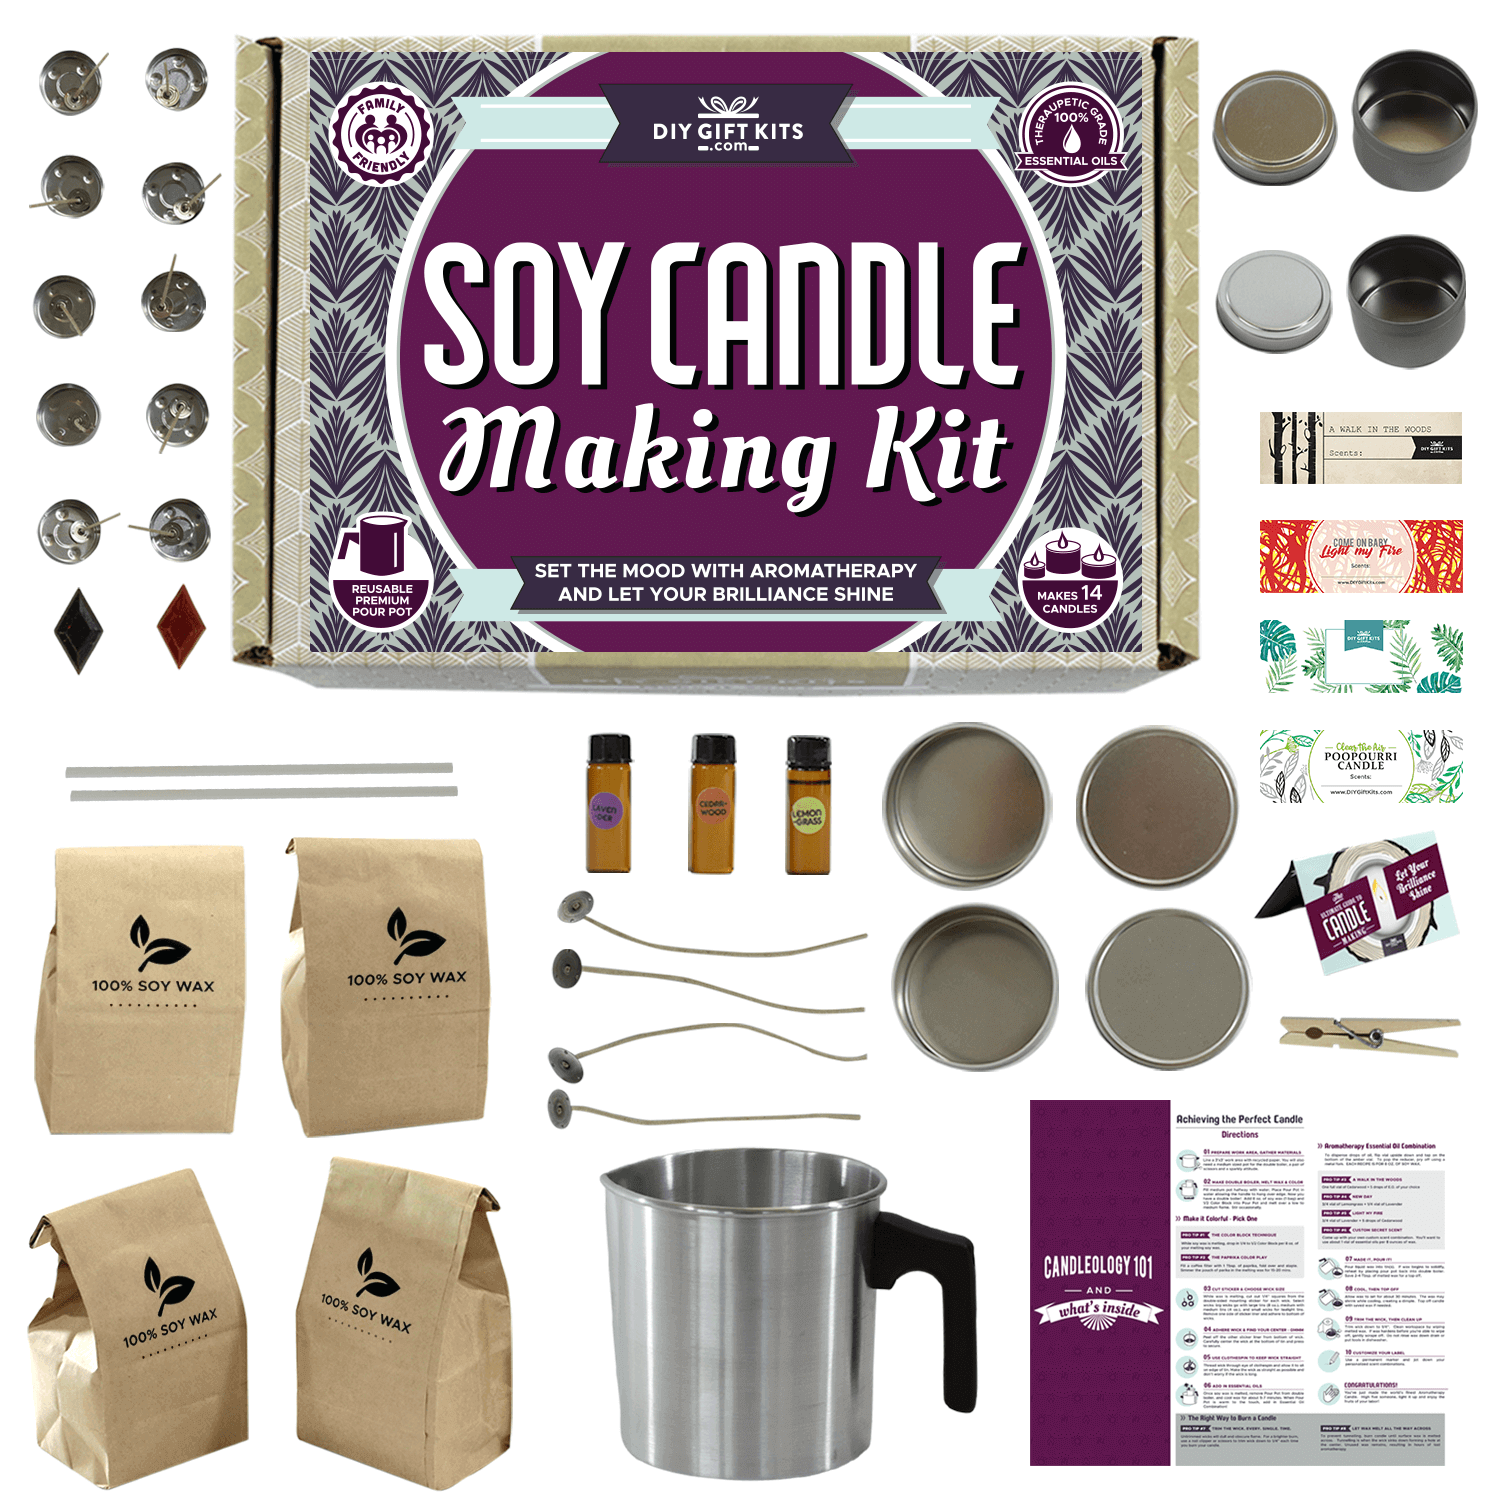 DIY Candle Making Kit, Soy Candle Making Kit, Make Your Own Candle, Do It  Yourself Craft Kit, Christmas Gift, Art Box for Adults and Kids 